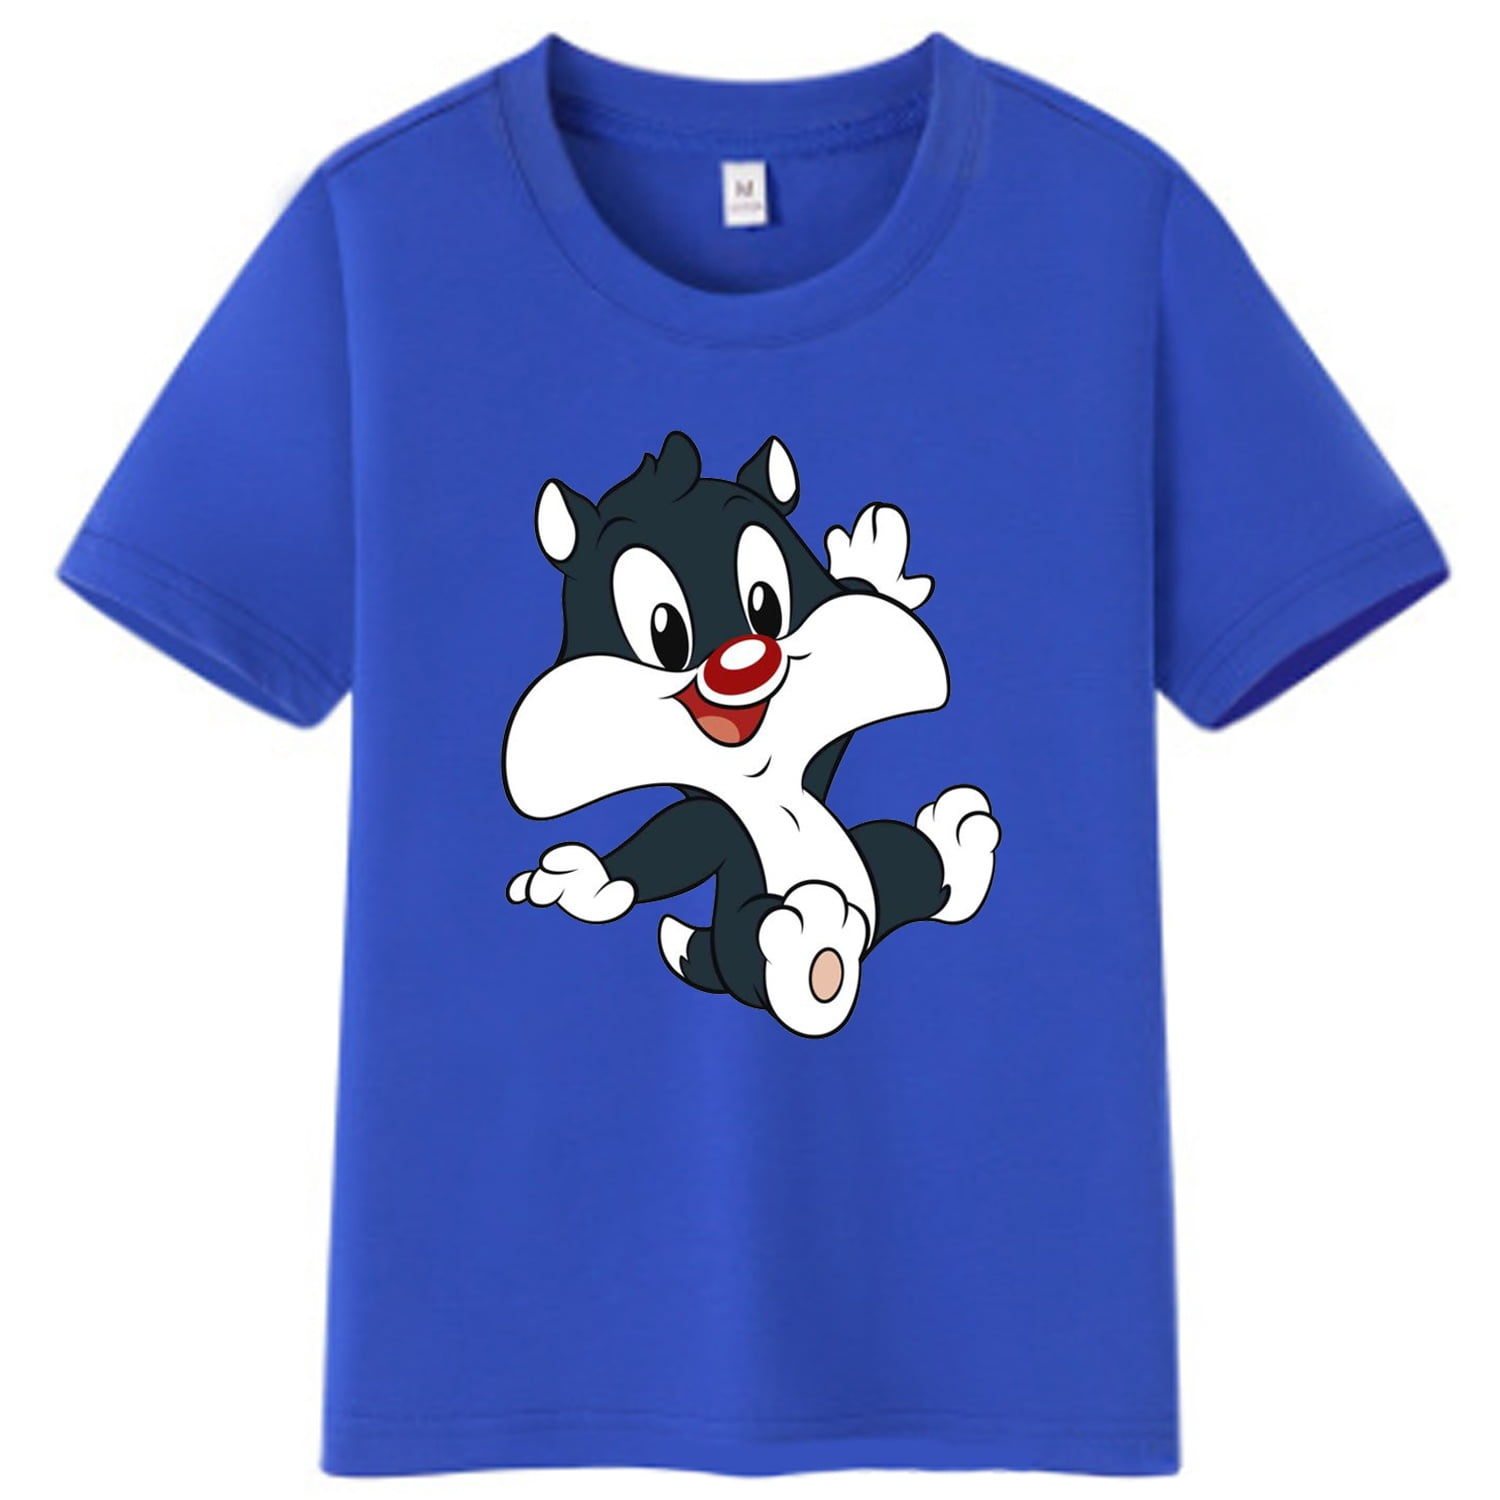 Tees Cat Gift for Tops Girls Girls Baby Cartoon Neck Short T-Shirts Tunes Sylvester Sleeve Scoop Looney Kids Casual Cotton Relaxed Boys